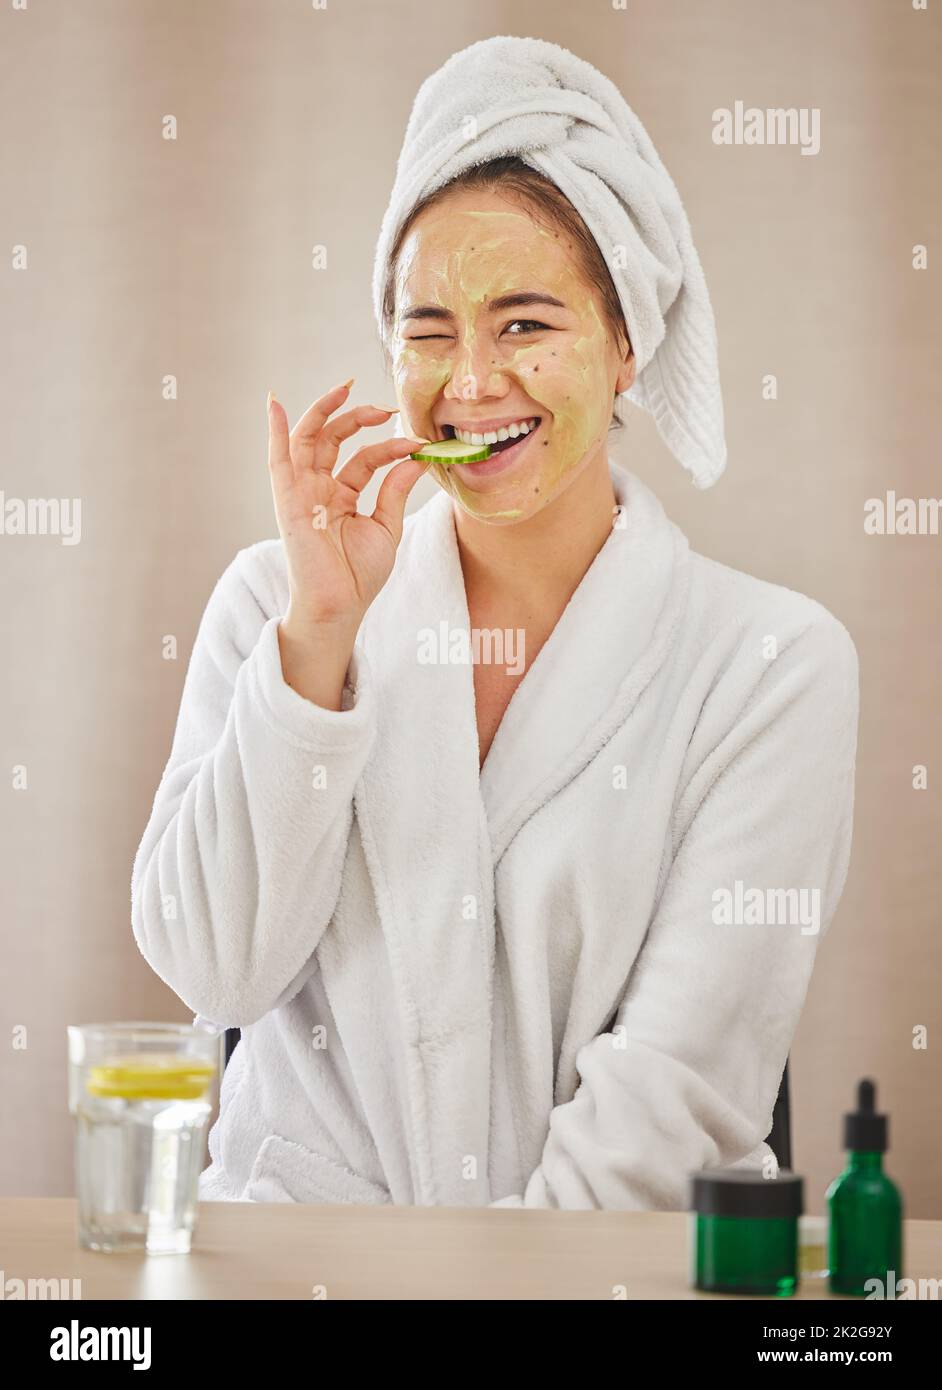 A self care kind of weekend. Shot of a young woman eating a cucumber while doing a facial beauty treatment at home. Stock Photo